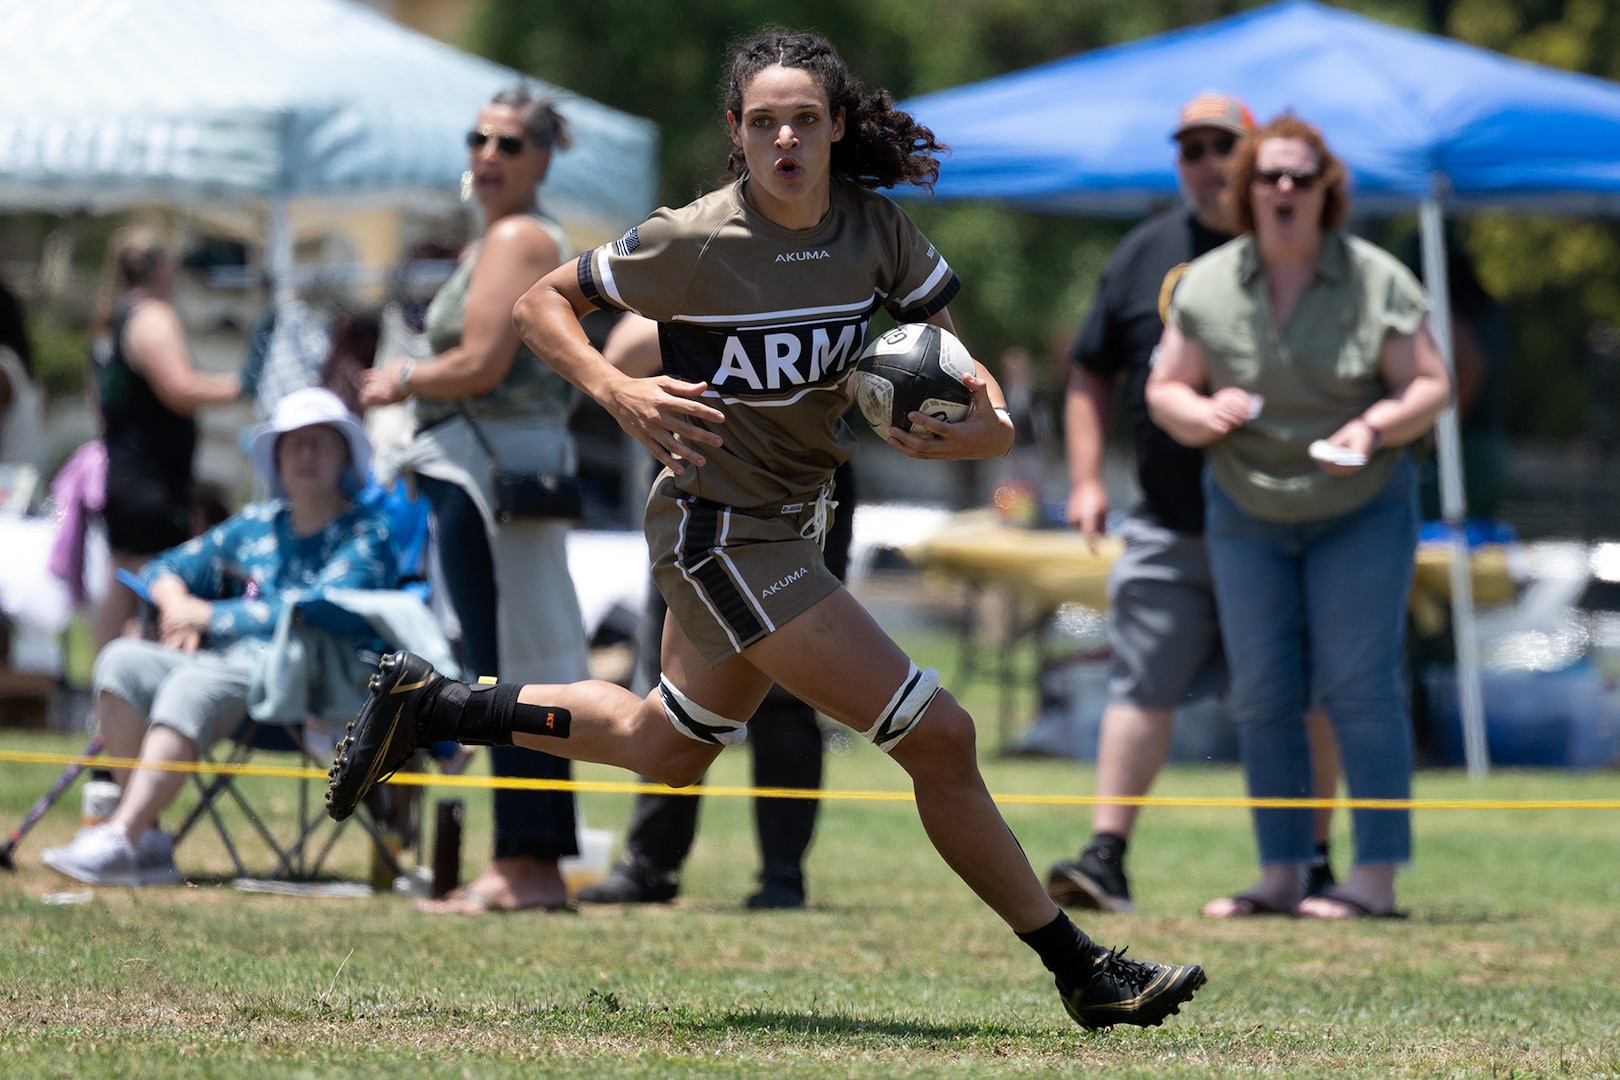 Army Reservist 1st Lt. Cienna Jordan scores three times during the championship match against the Air Force during the 2024 Armed Forces Women’s Rugby Championships held in conjunction with the San Diego Surfers Women’s Rugby Club 7’s Tournament in San Diego, Calif. from July 12-13. Service members from the Army, Marine Corps, Navy, Air Force (with Space Force players), and Coast Guard battle it out for gold.